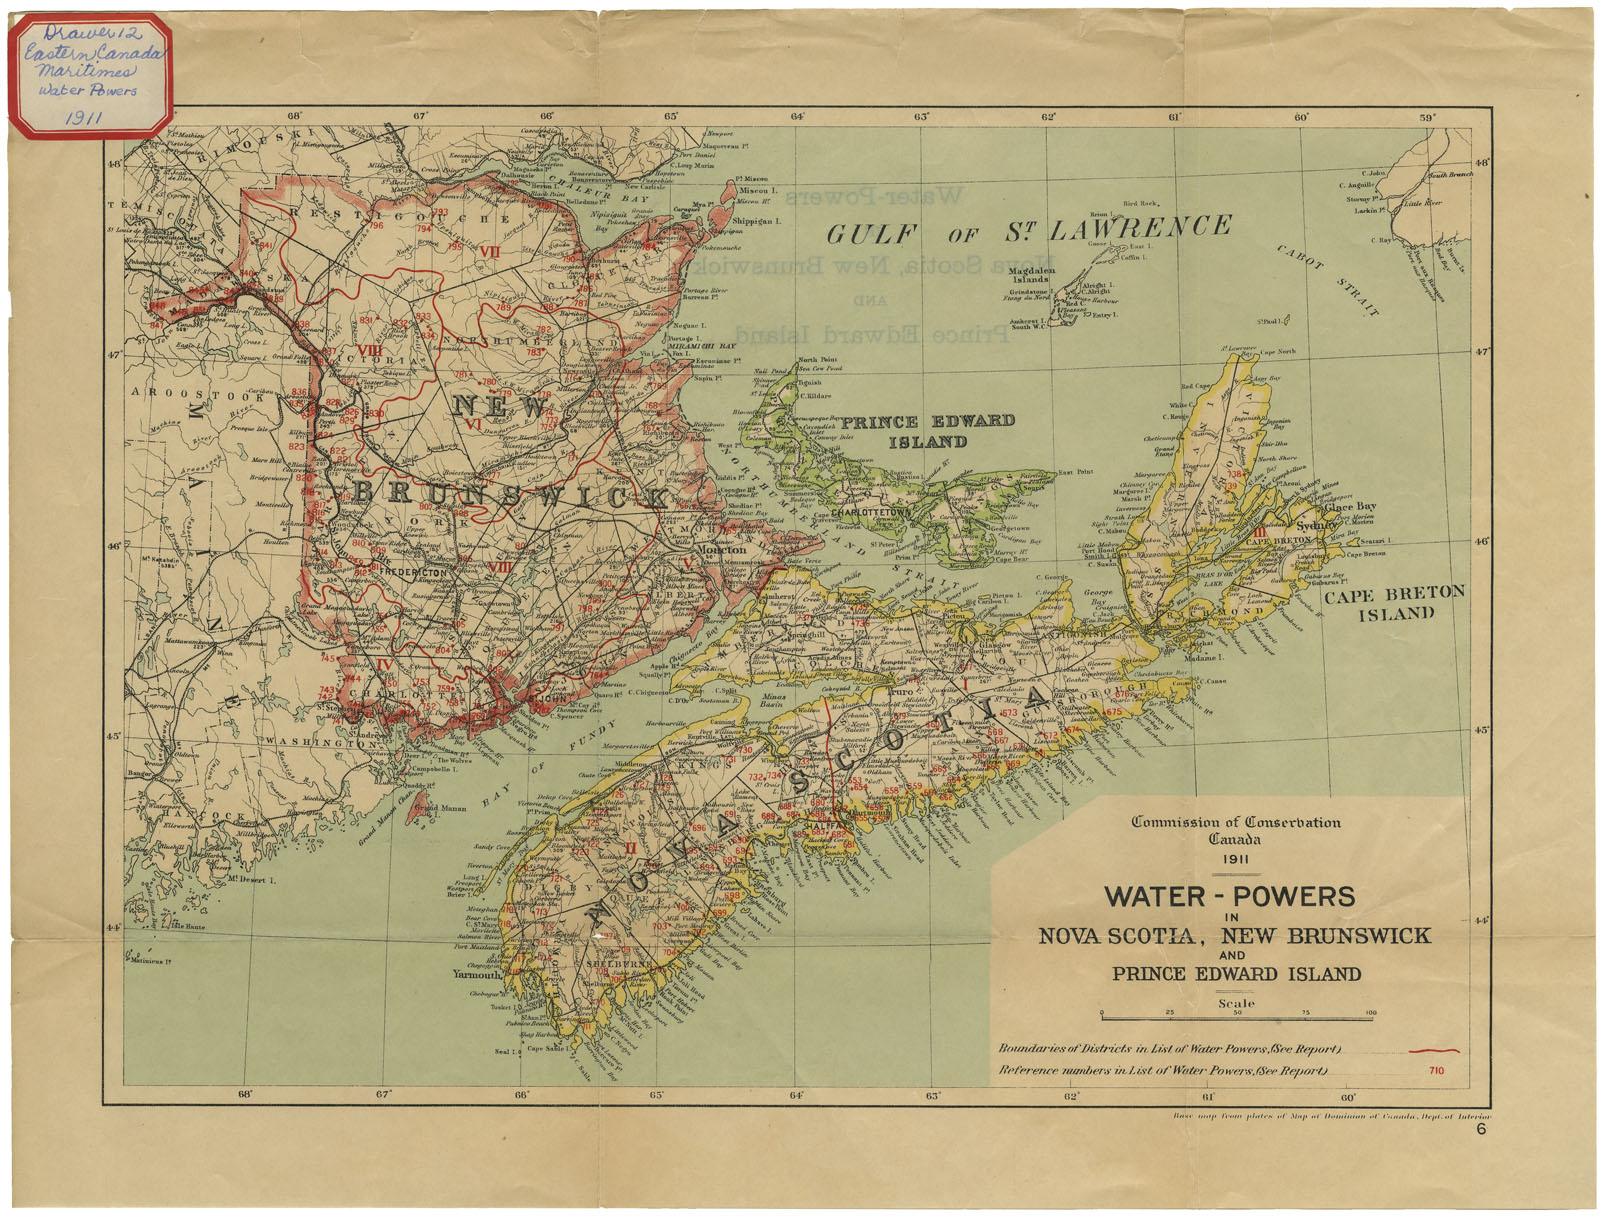 Commission of Conservation. Canada 1911. Water-Powers in Nova Scotia, New Brunswick and Prince Edward Isalnd 1911